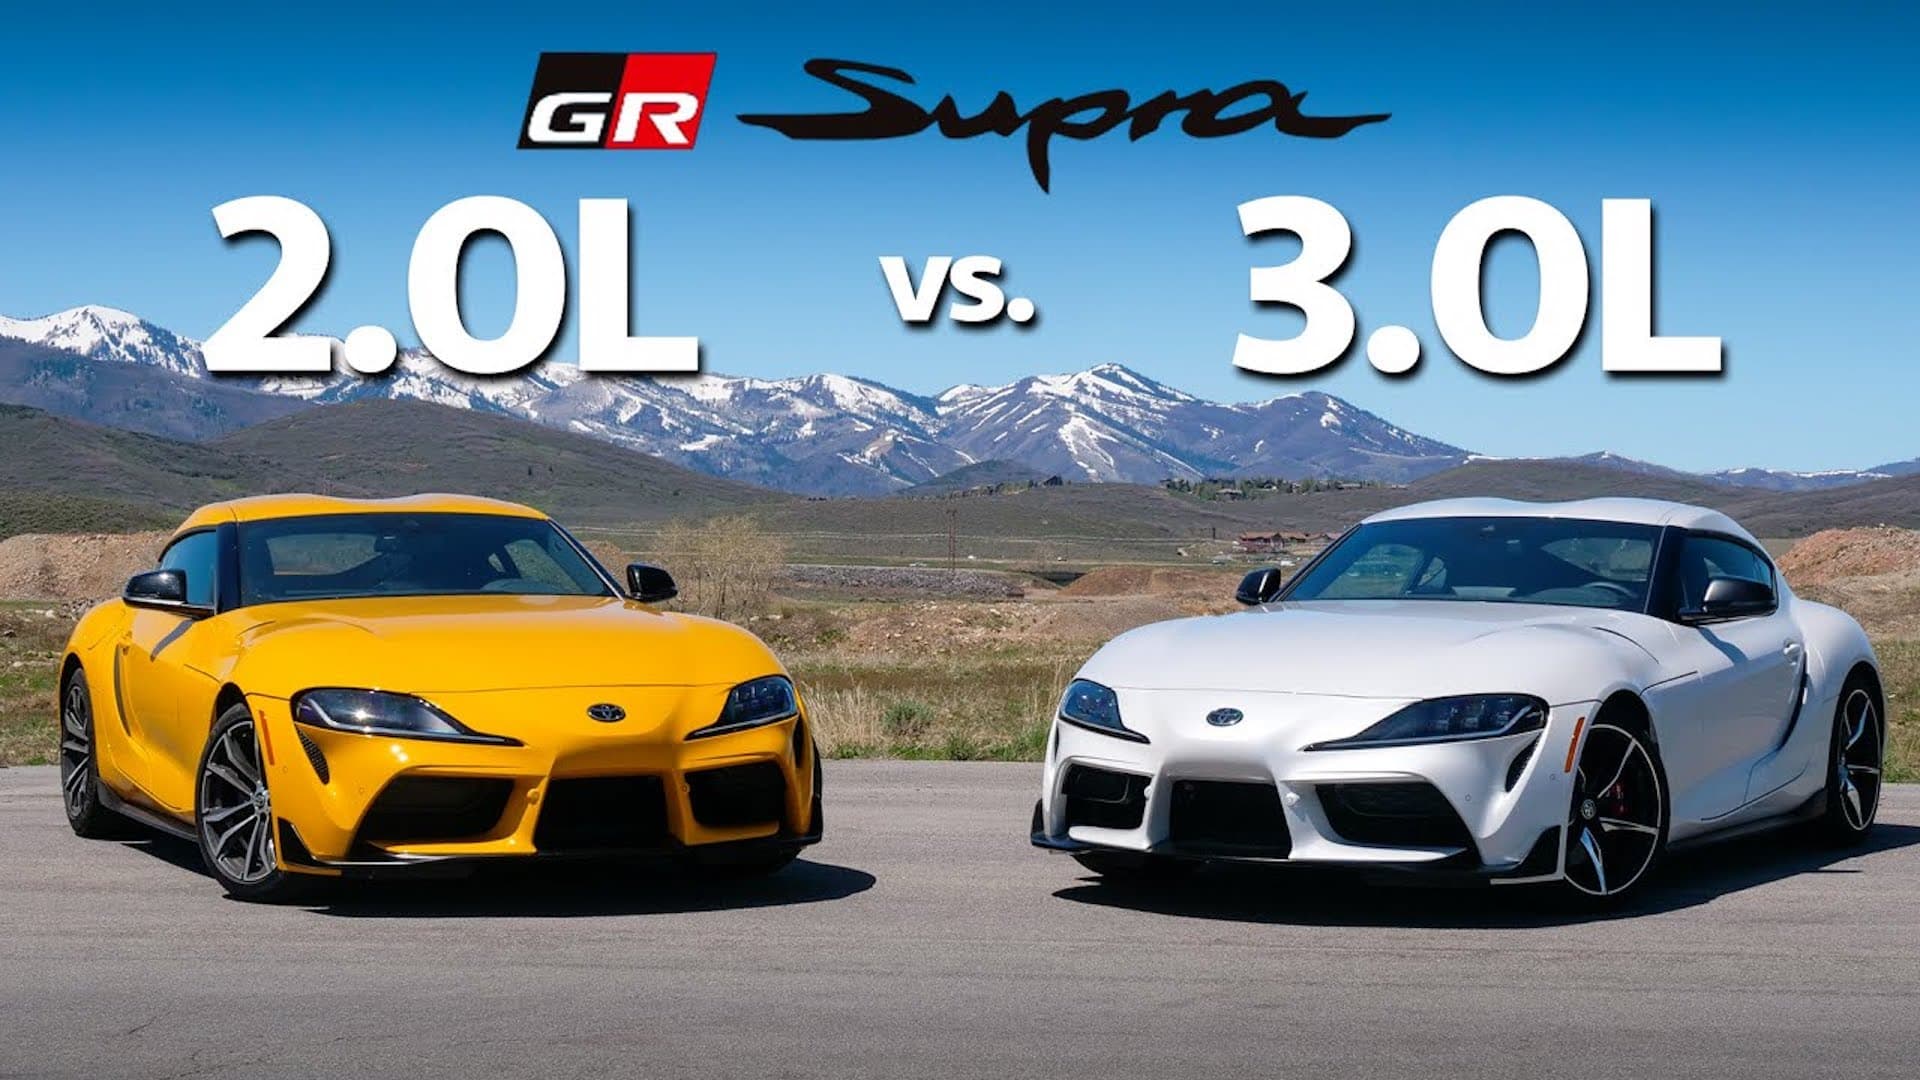 Which Is Best: The Four-Cylinder or Six-Cylinder Toyota Supra?